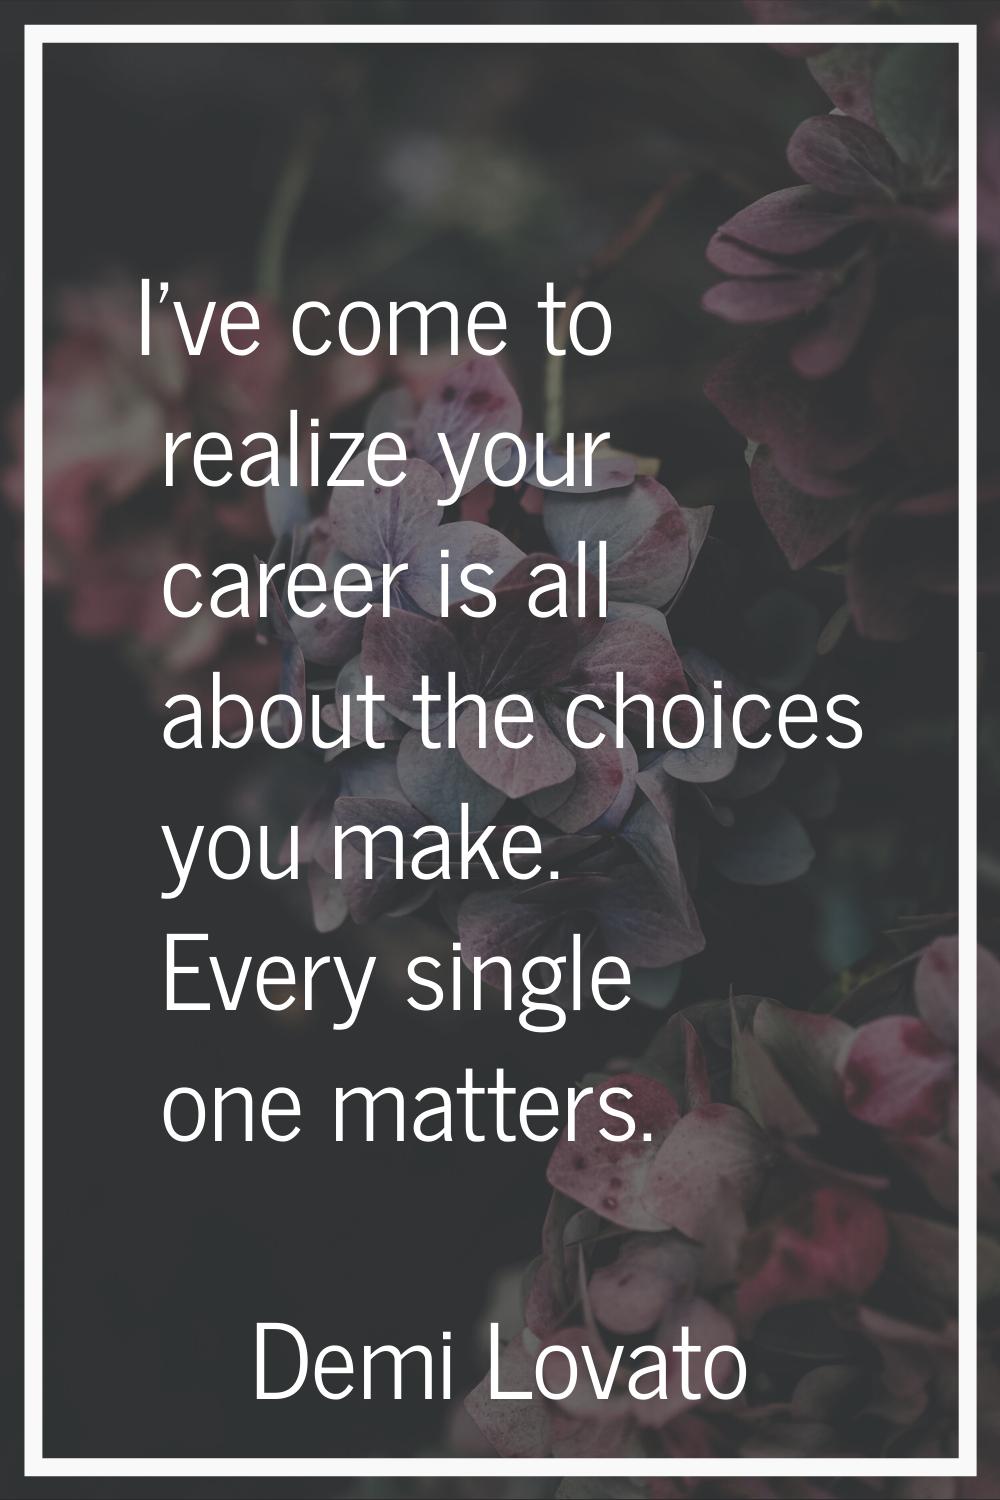 I've come to realize your career is all about the choices you make. Every single one matters.